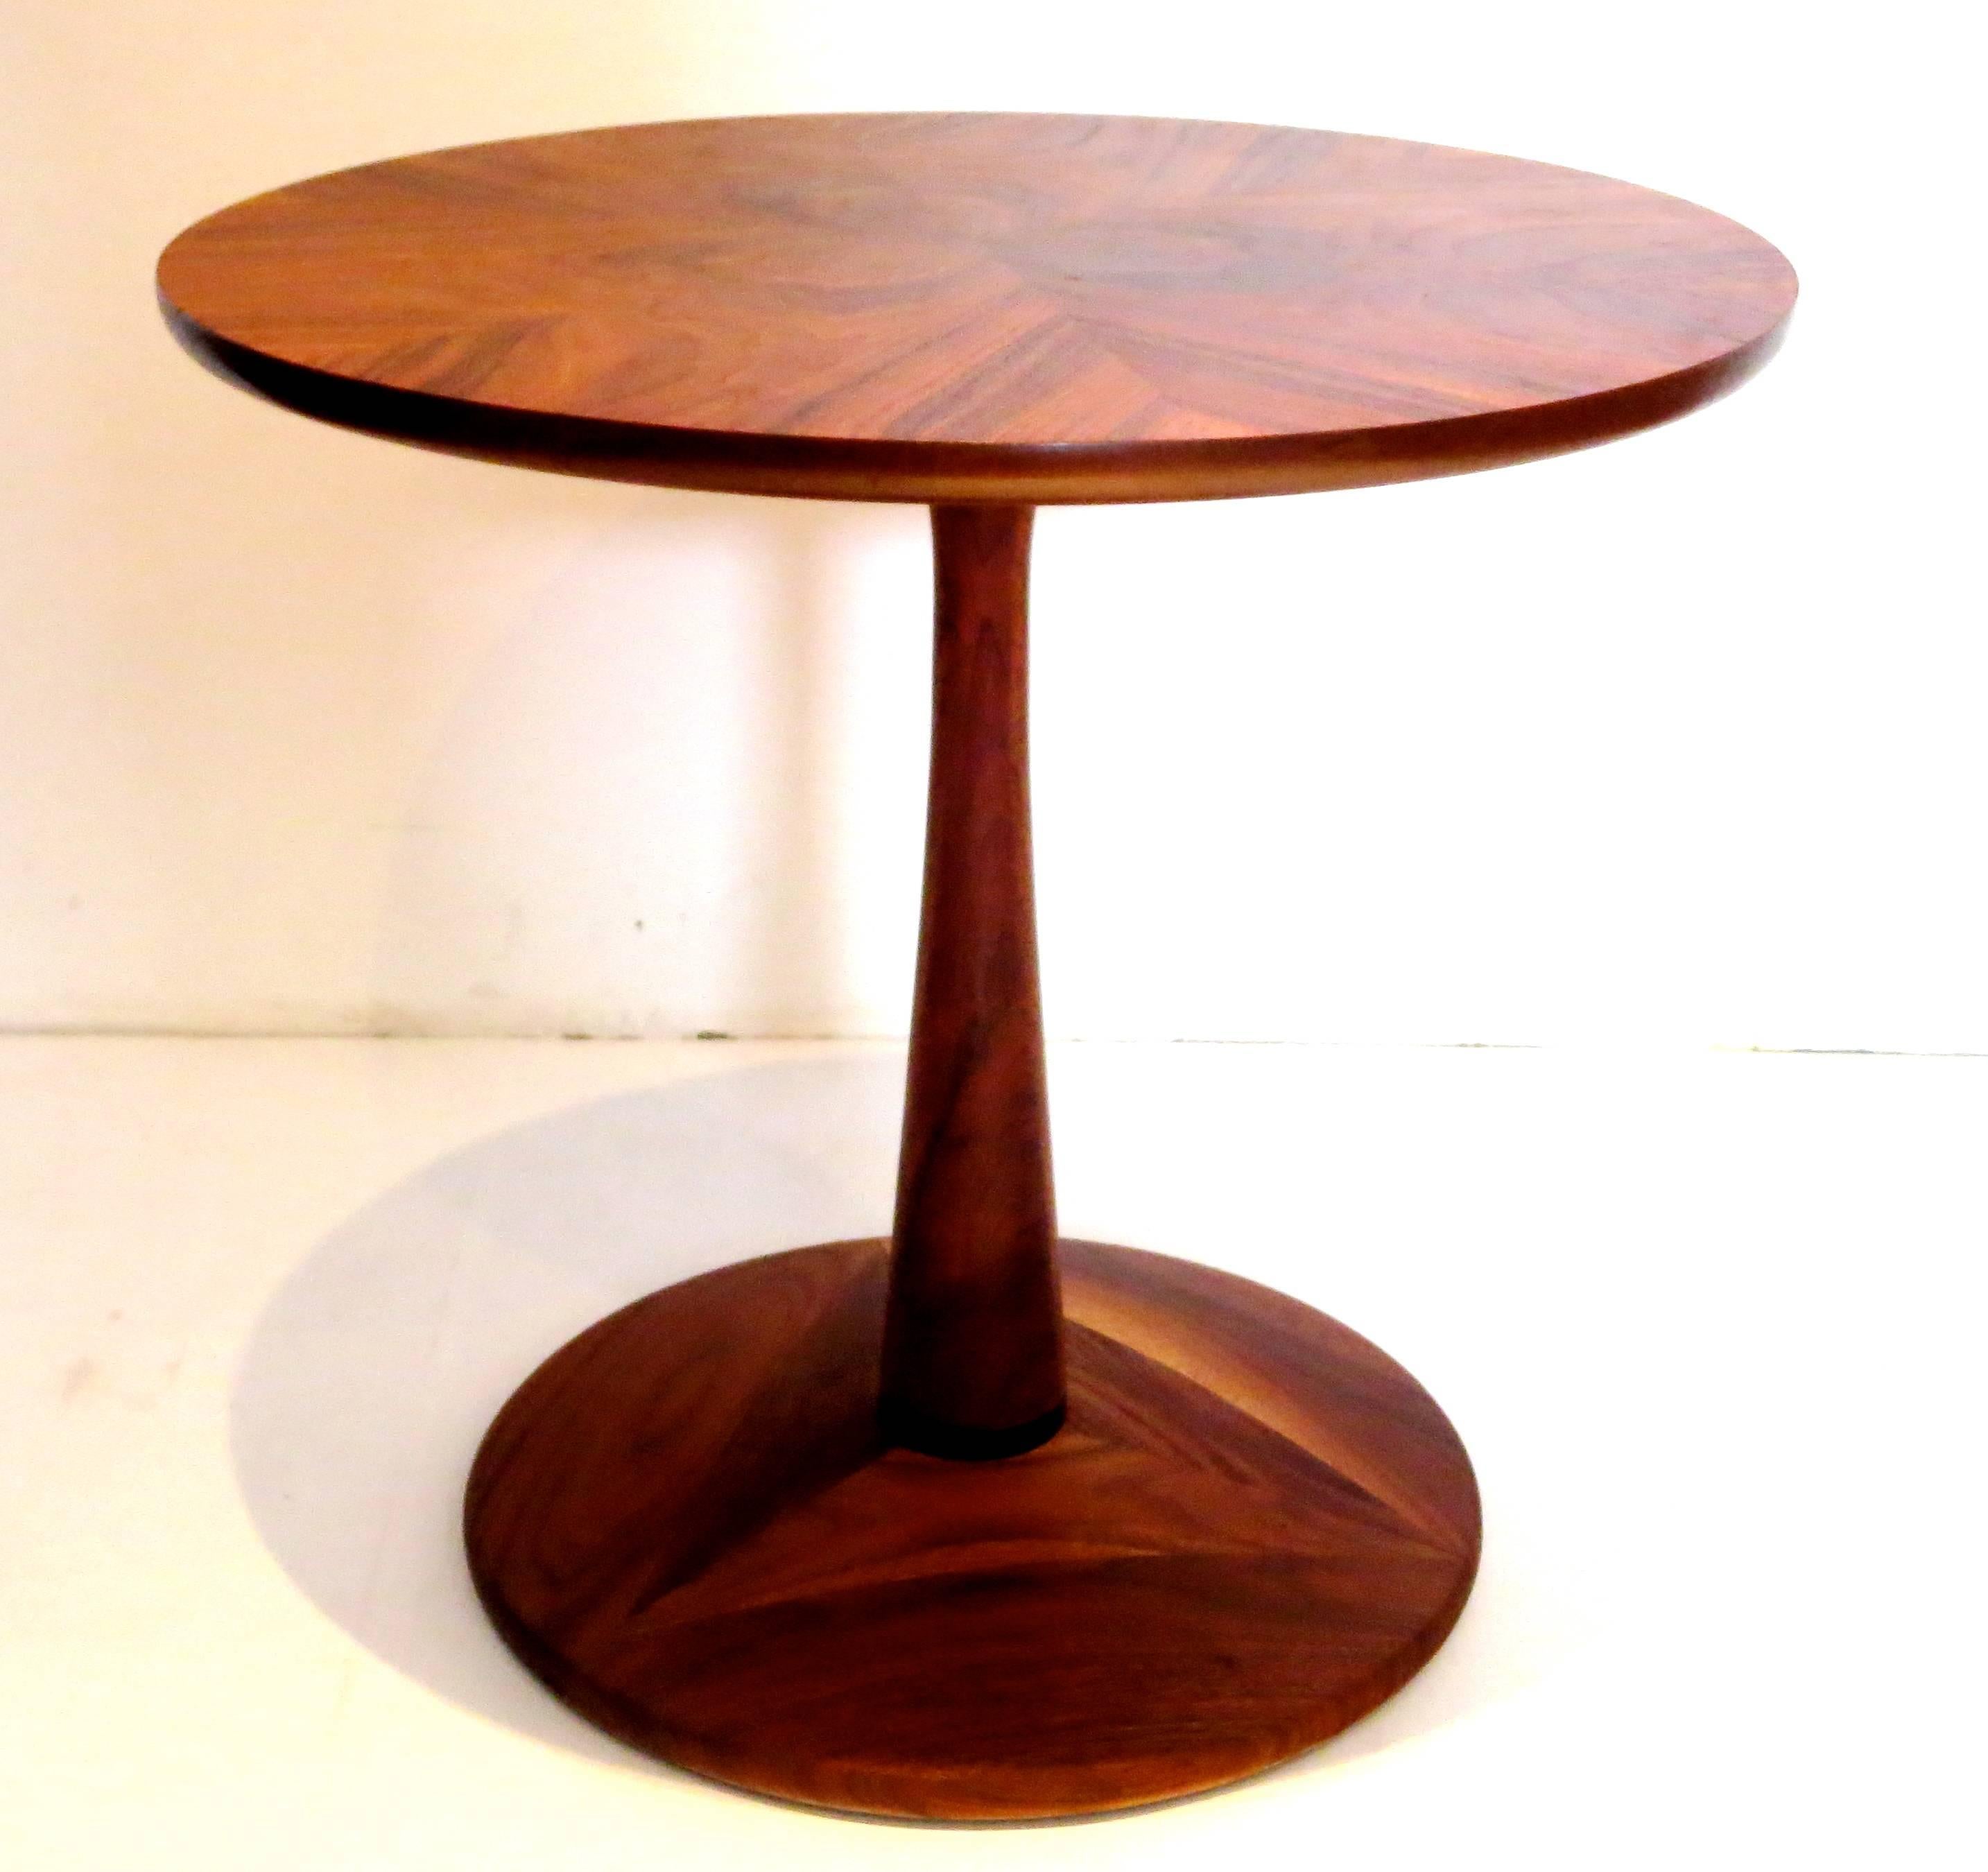 A very nice small cocktail table designed by Kipp Stewart for Drexel, in walnut perfect for in between two chairs, beautiful top freshly refinished solid and sturdy, circa 1950s.